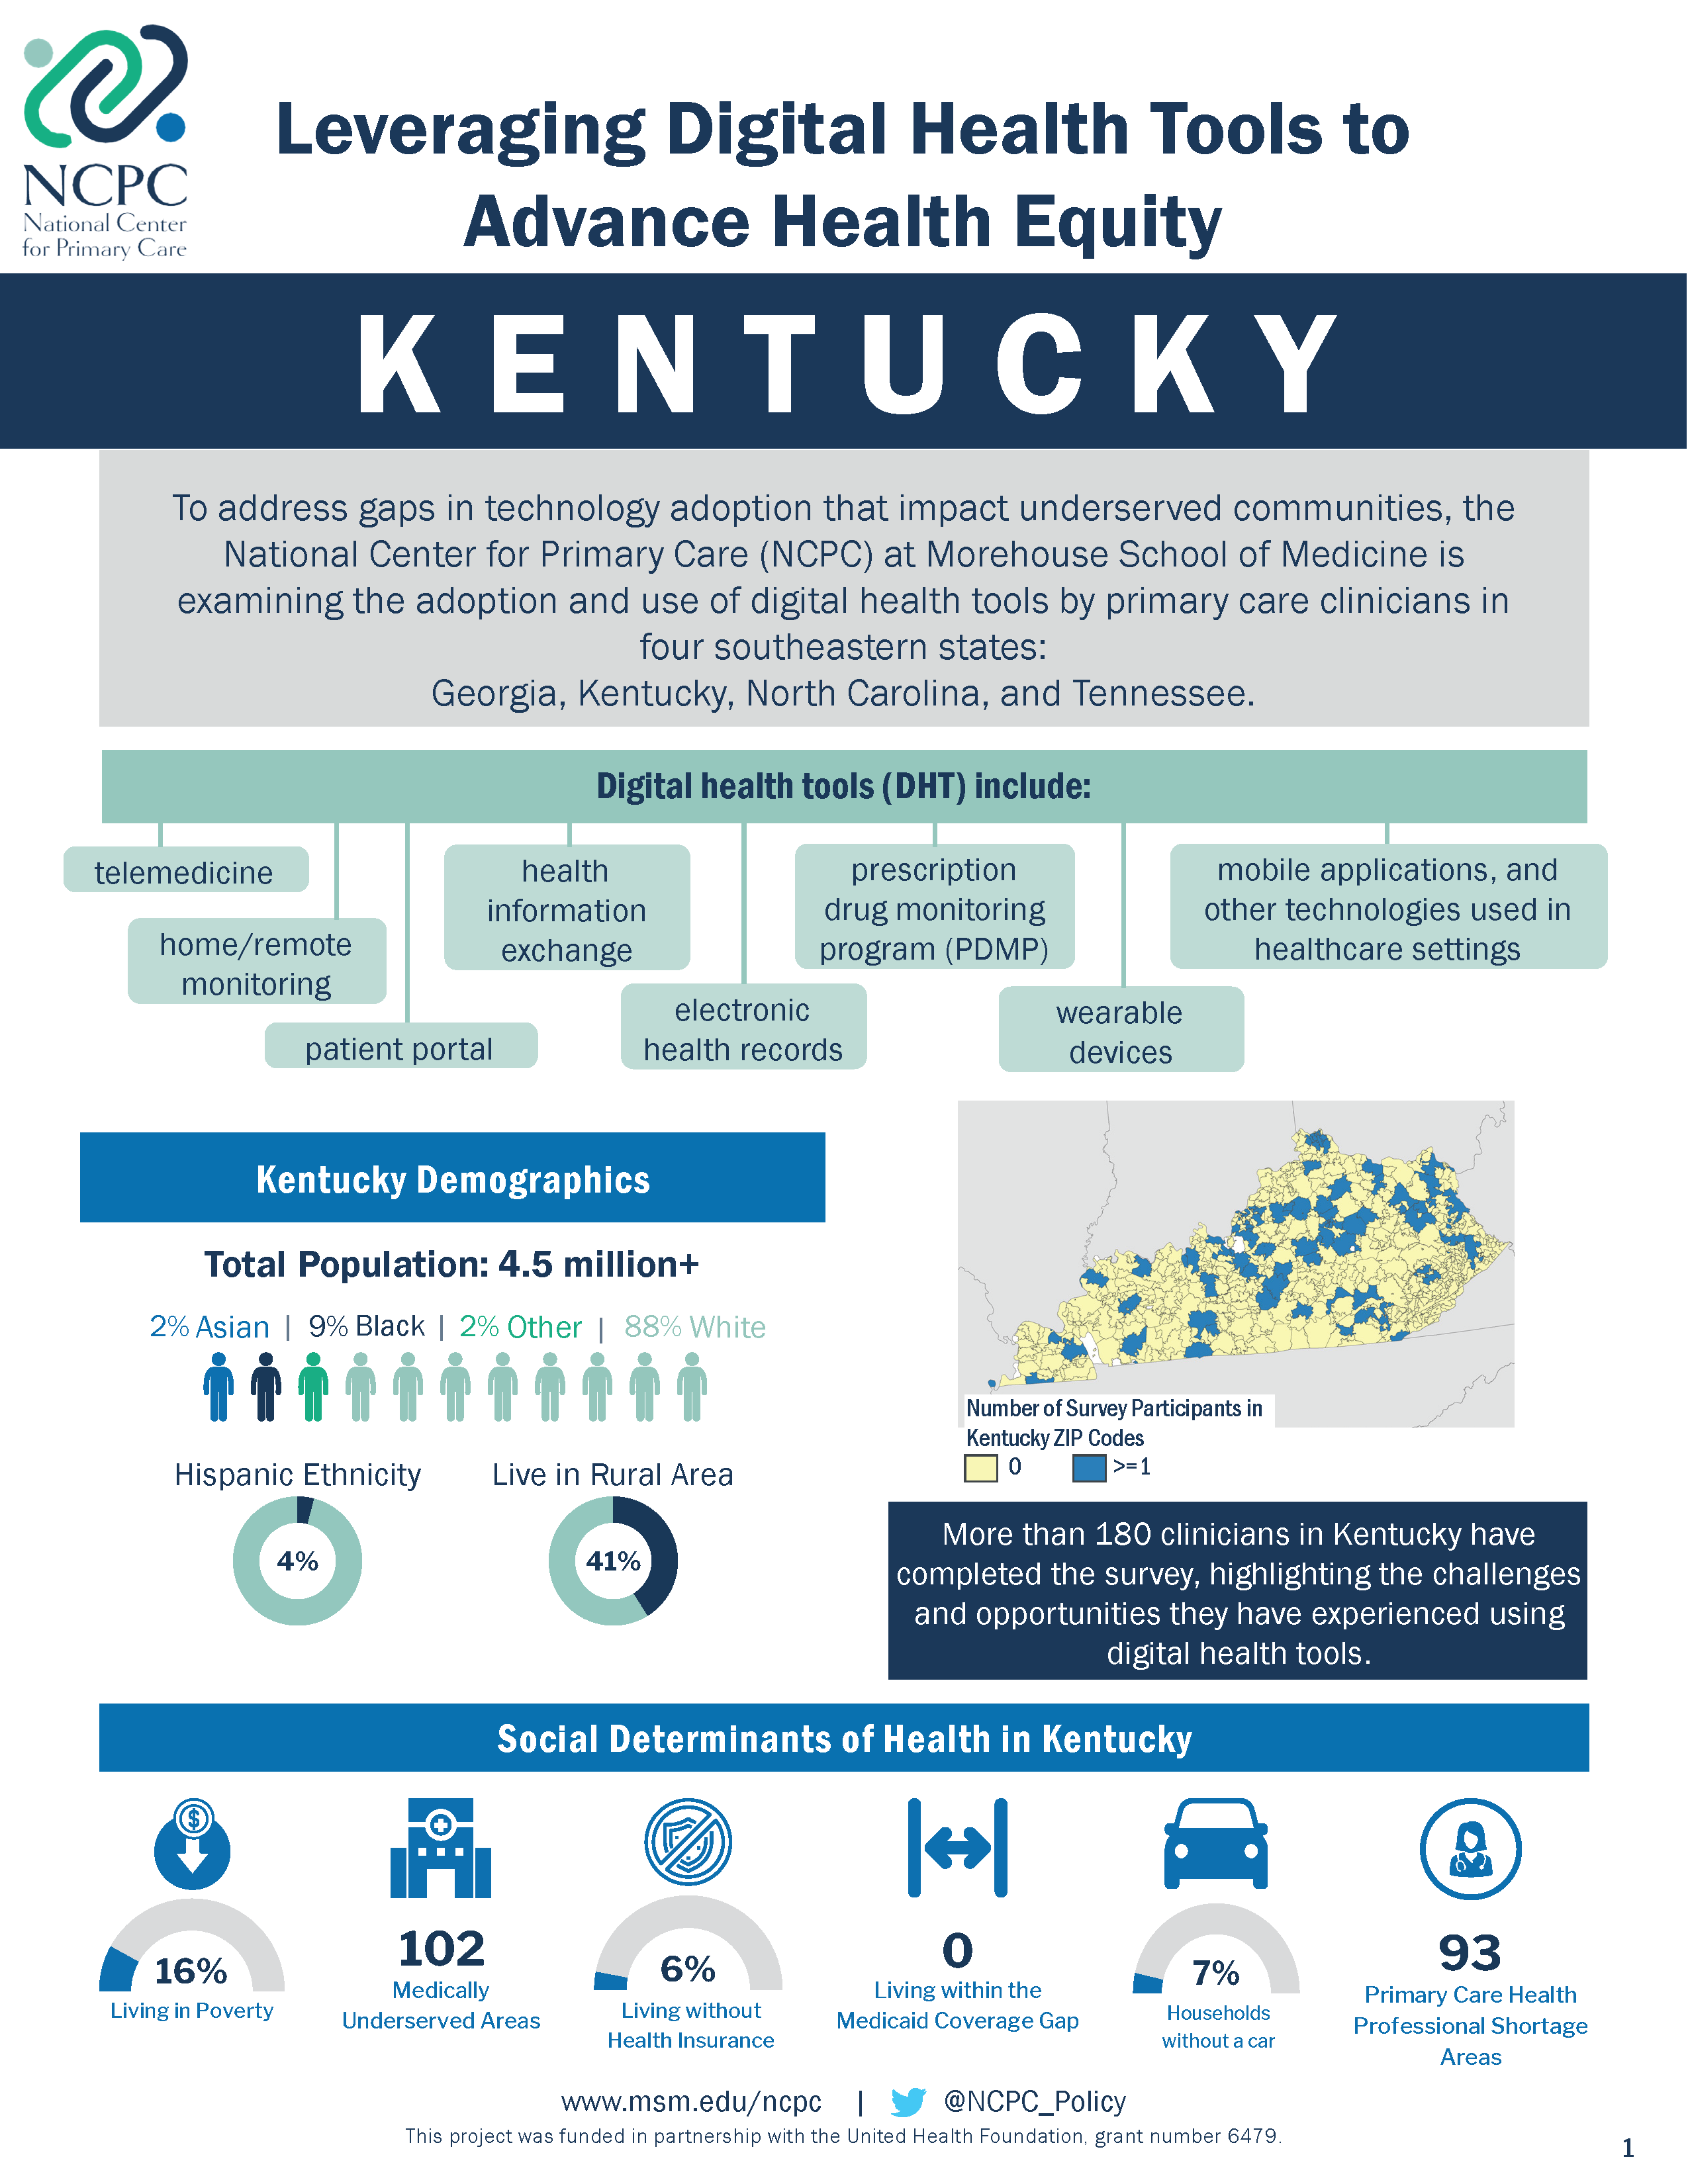 KY Leadership Roundtable Brief